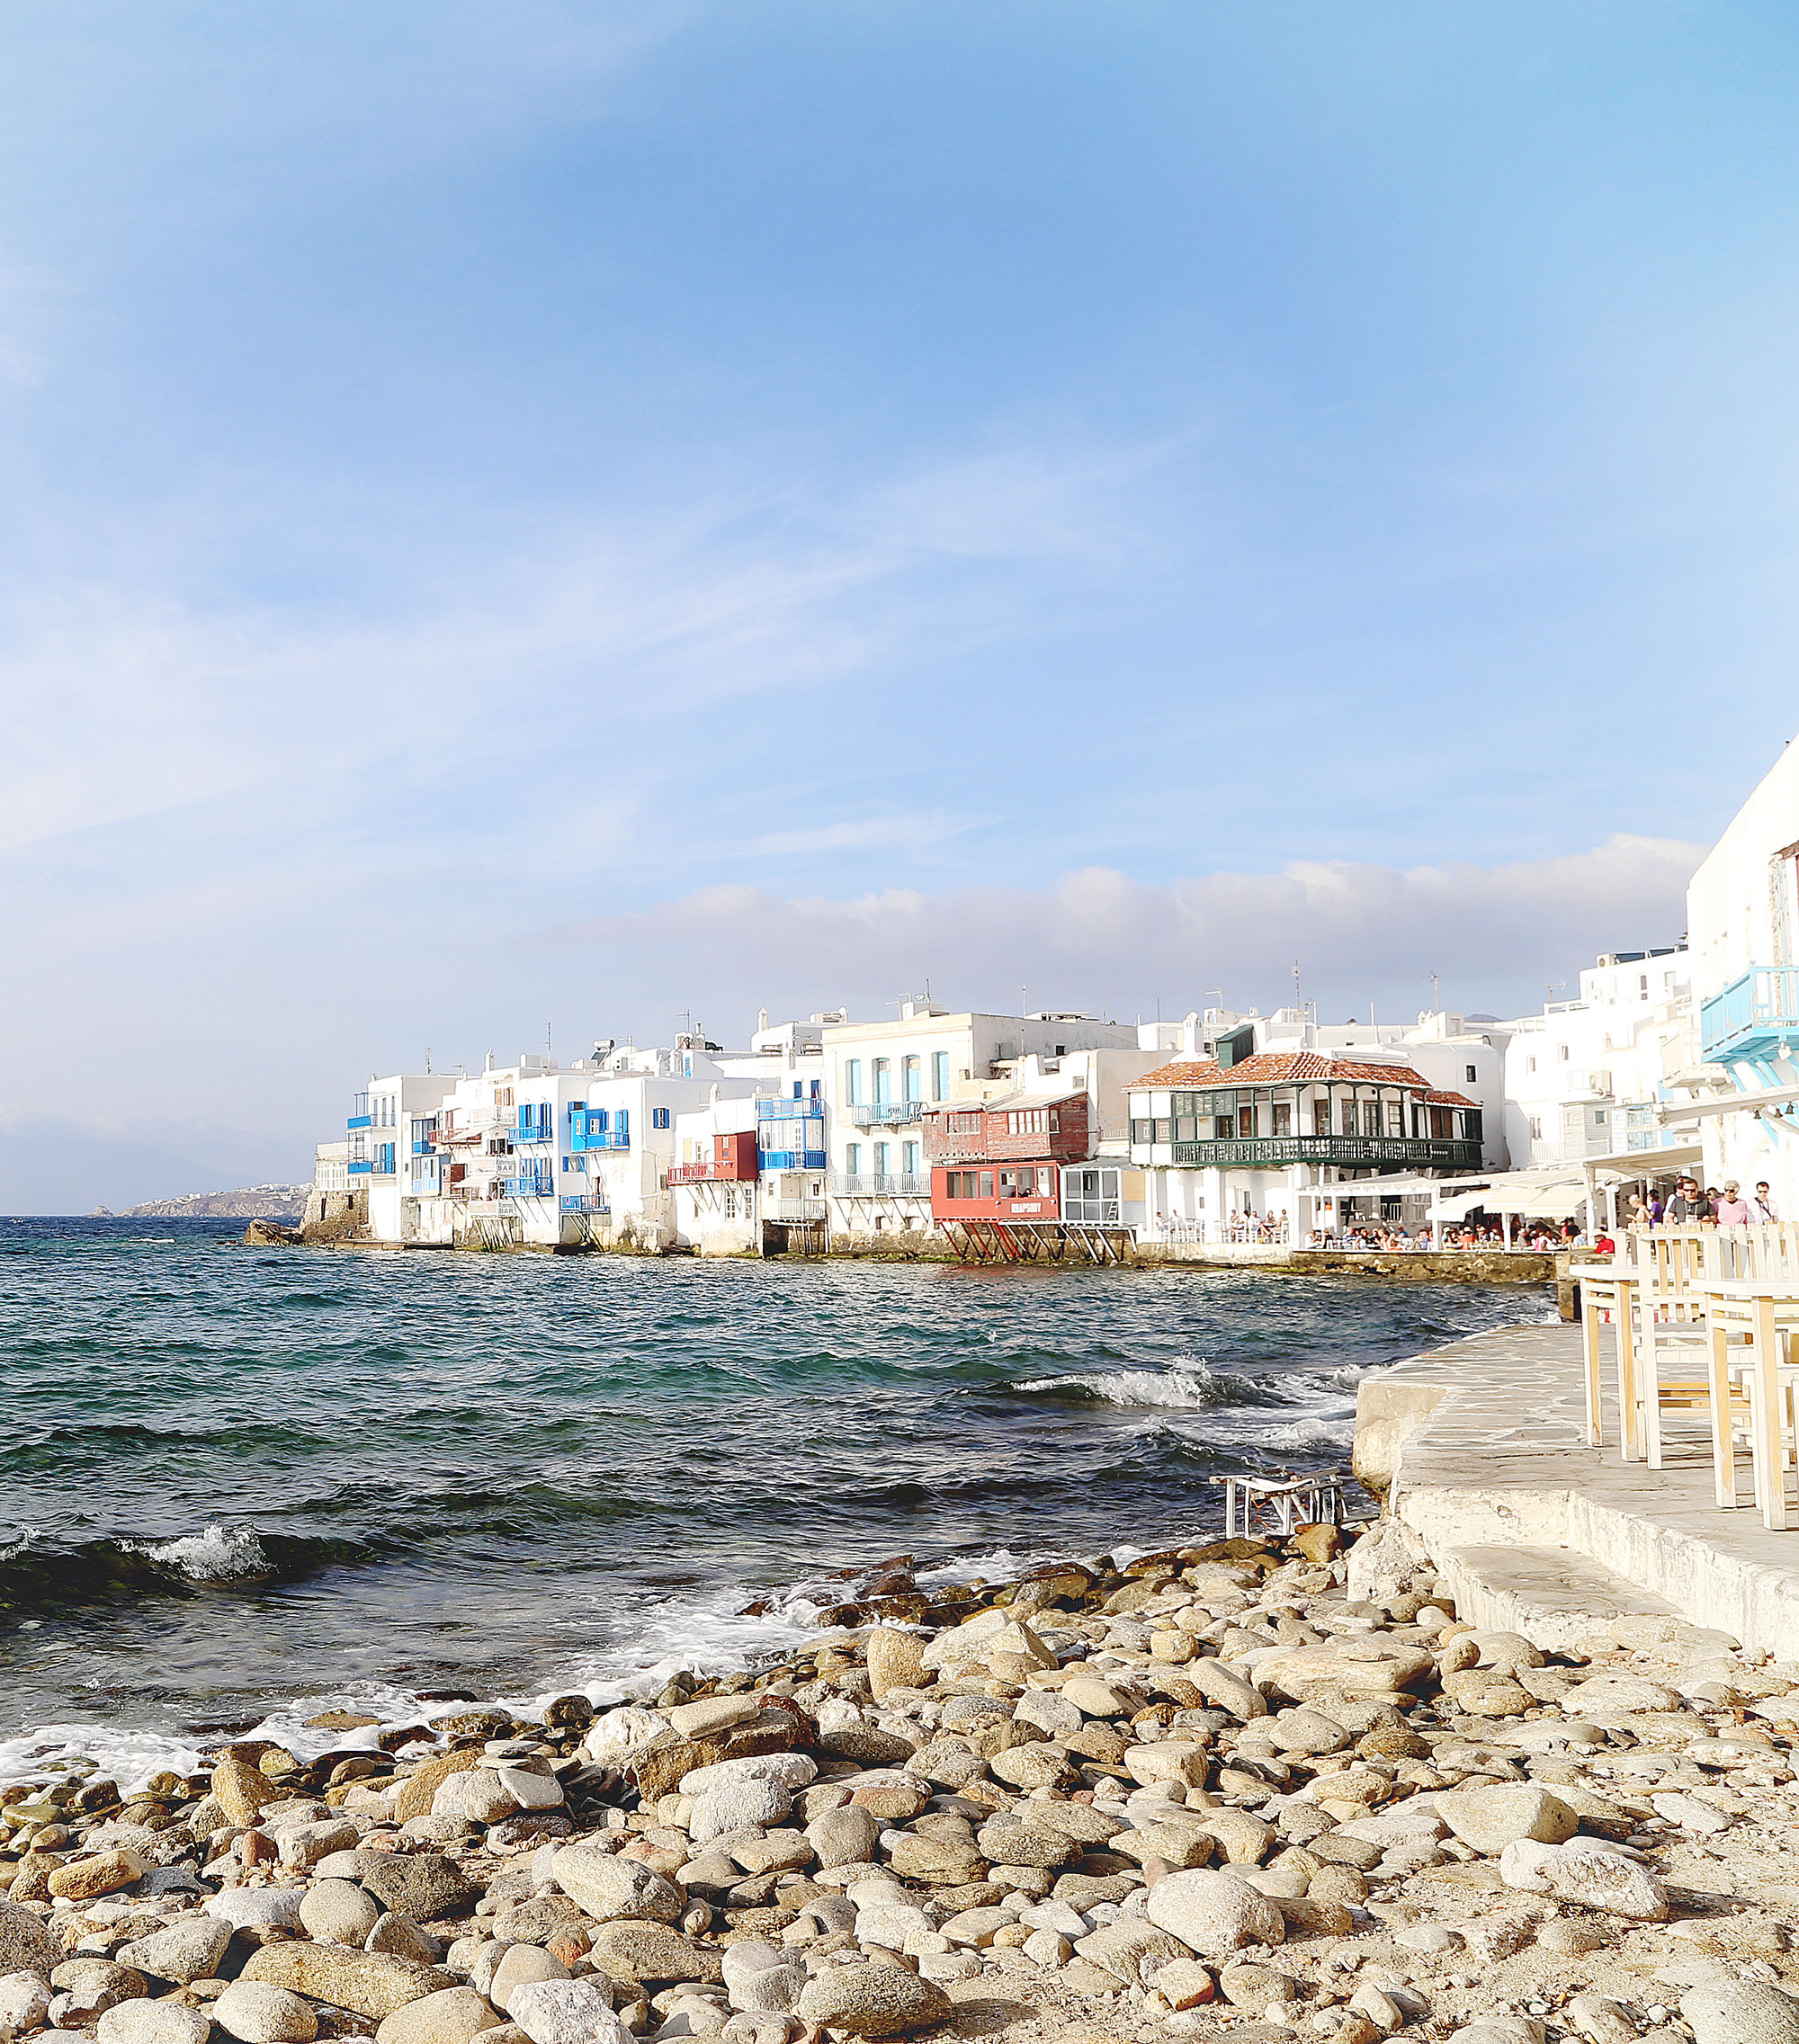 Mykonos Travel Guide - what to see and do in Mykonos, Greece